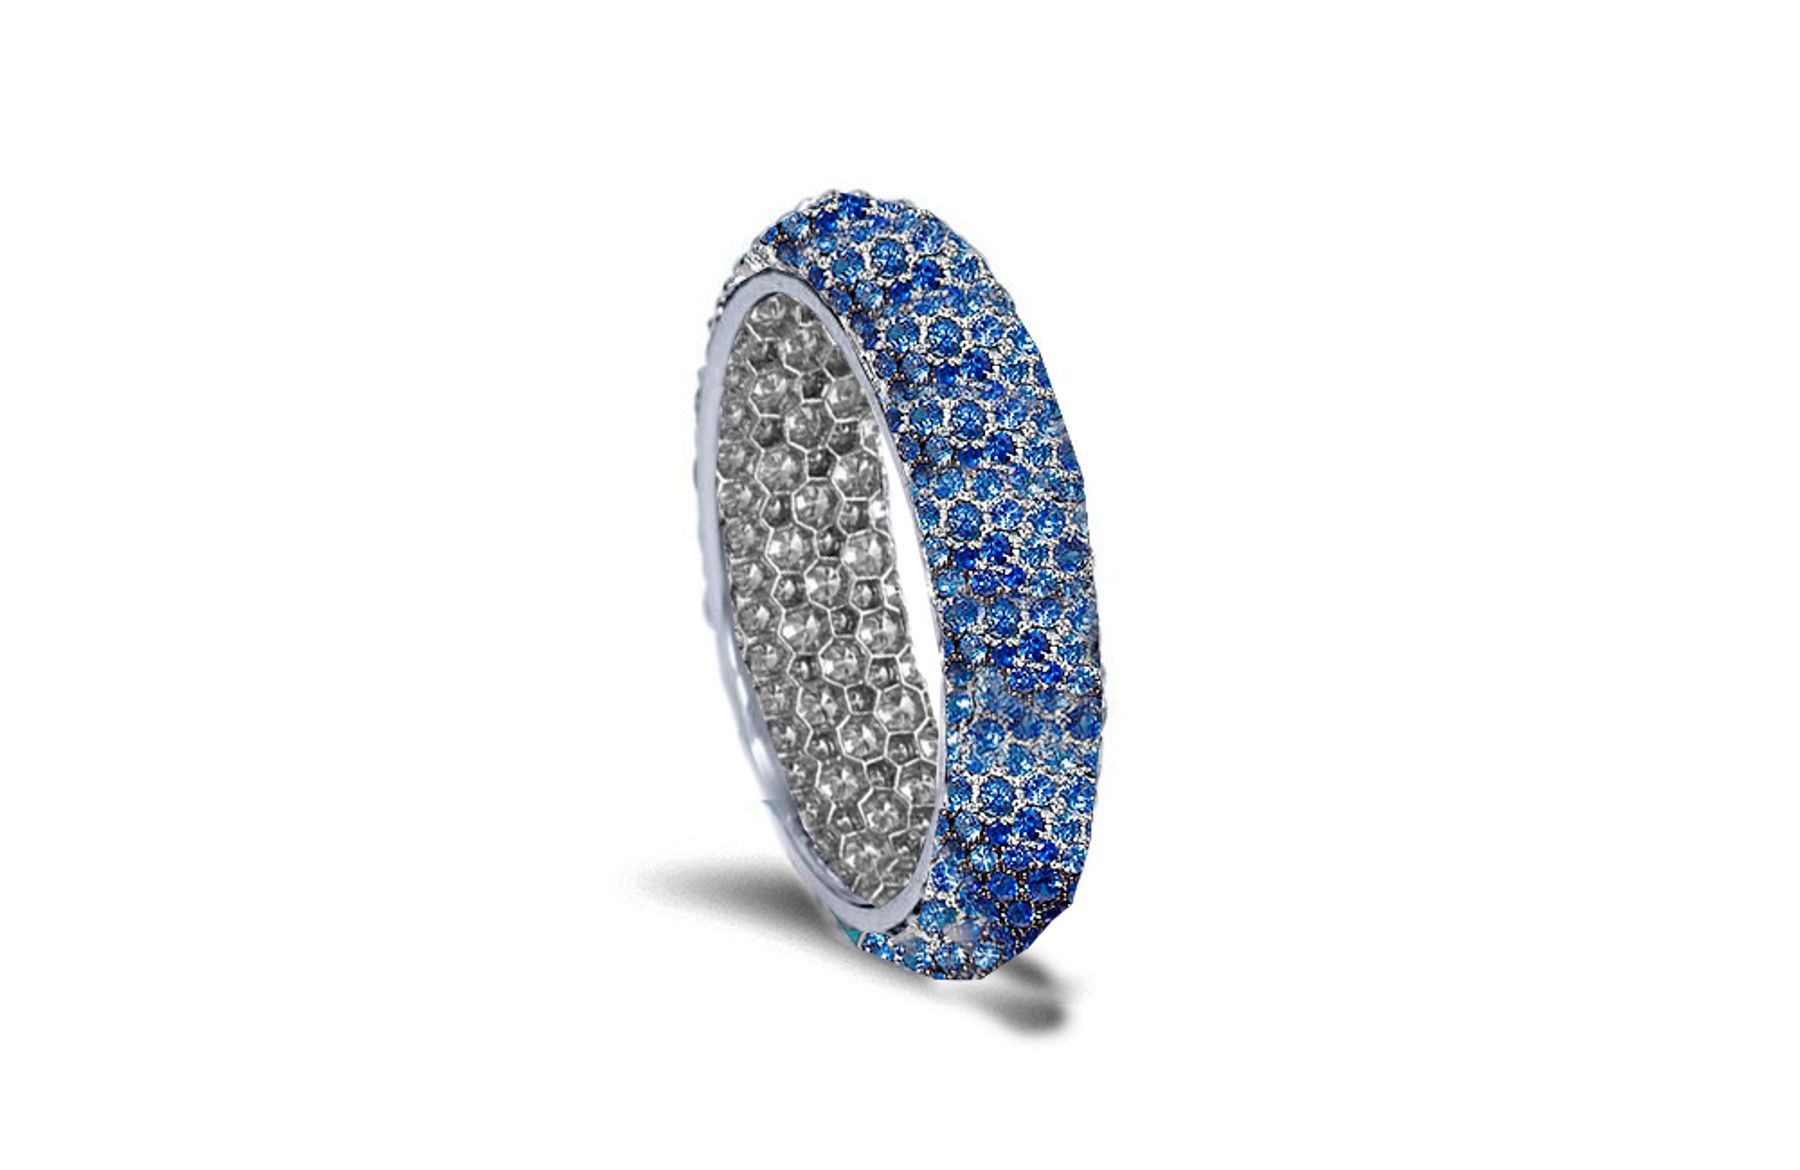 Keep Your Memories Close With White Diamonds and Colored Stone Eternity Rings and Latest Wedding Bands